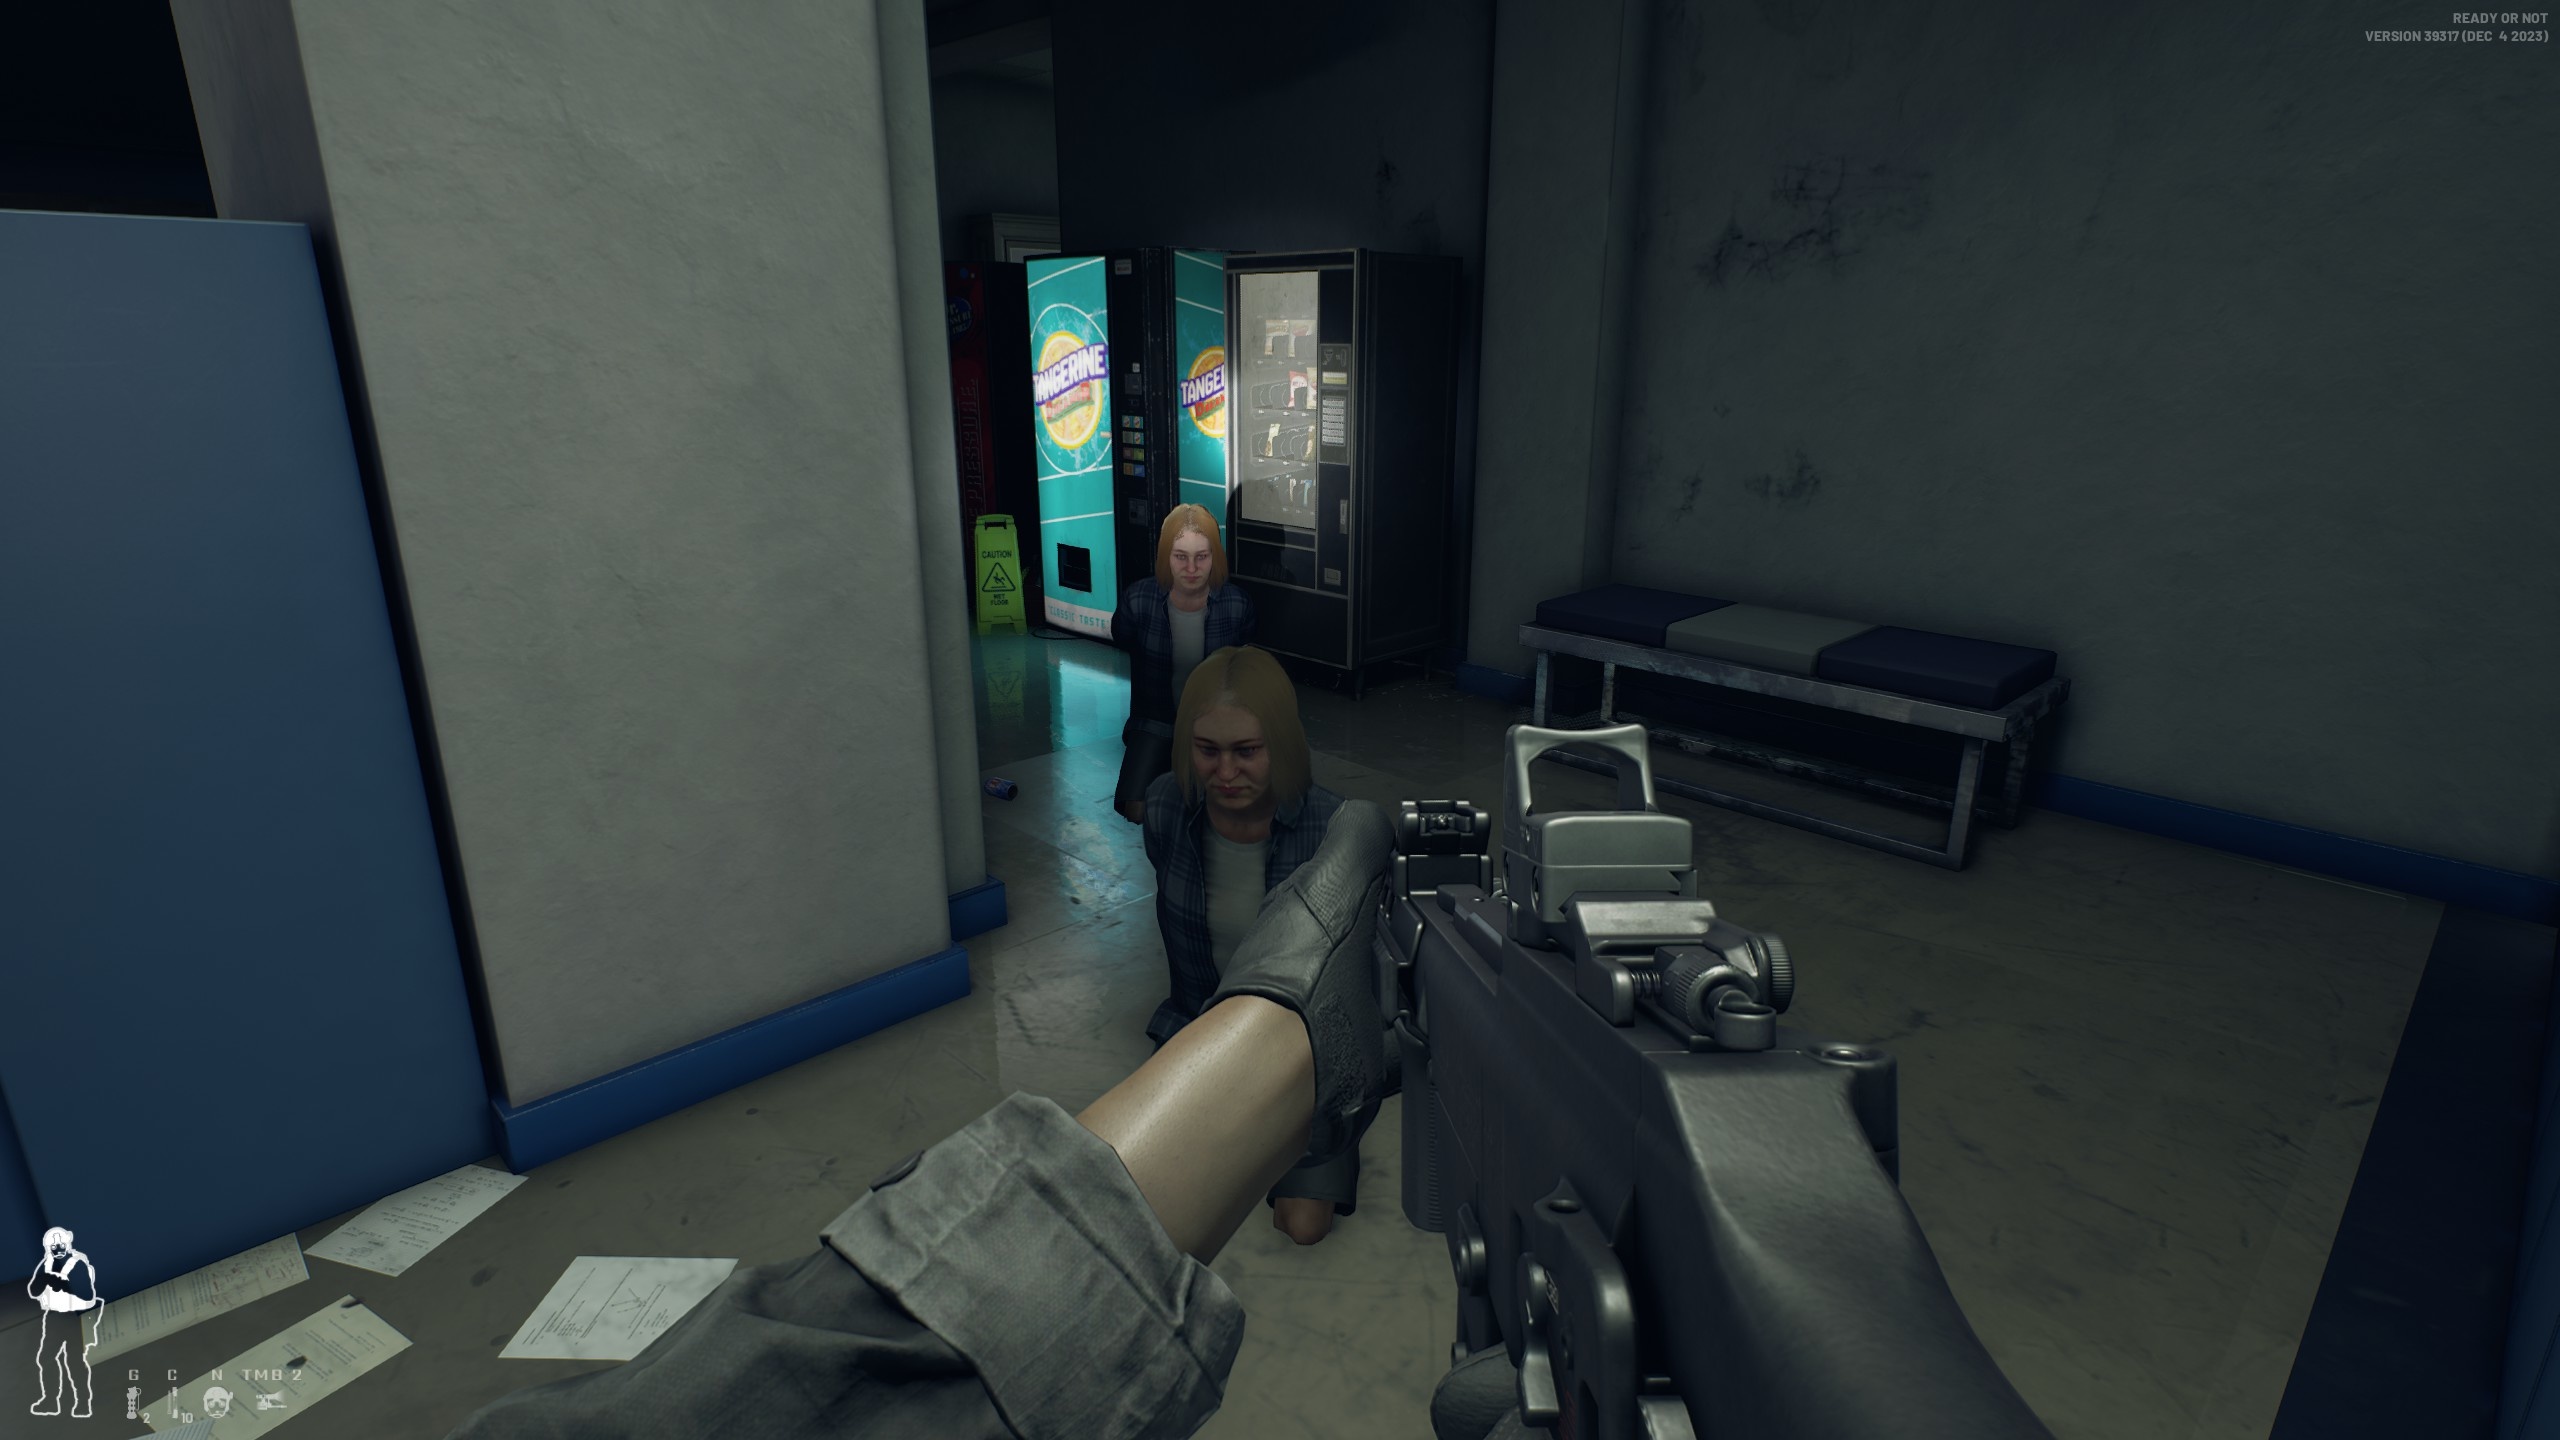 (There is still little variety in the character models. However, we have rarely experienced unfortunate situations like the hostage twins here.)